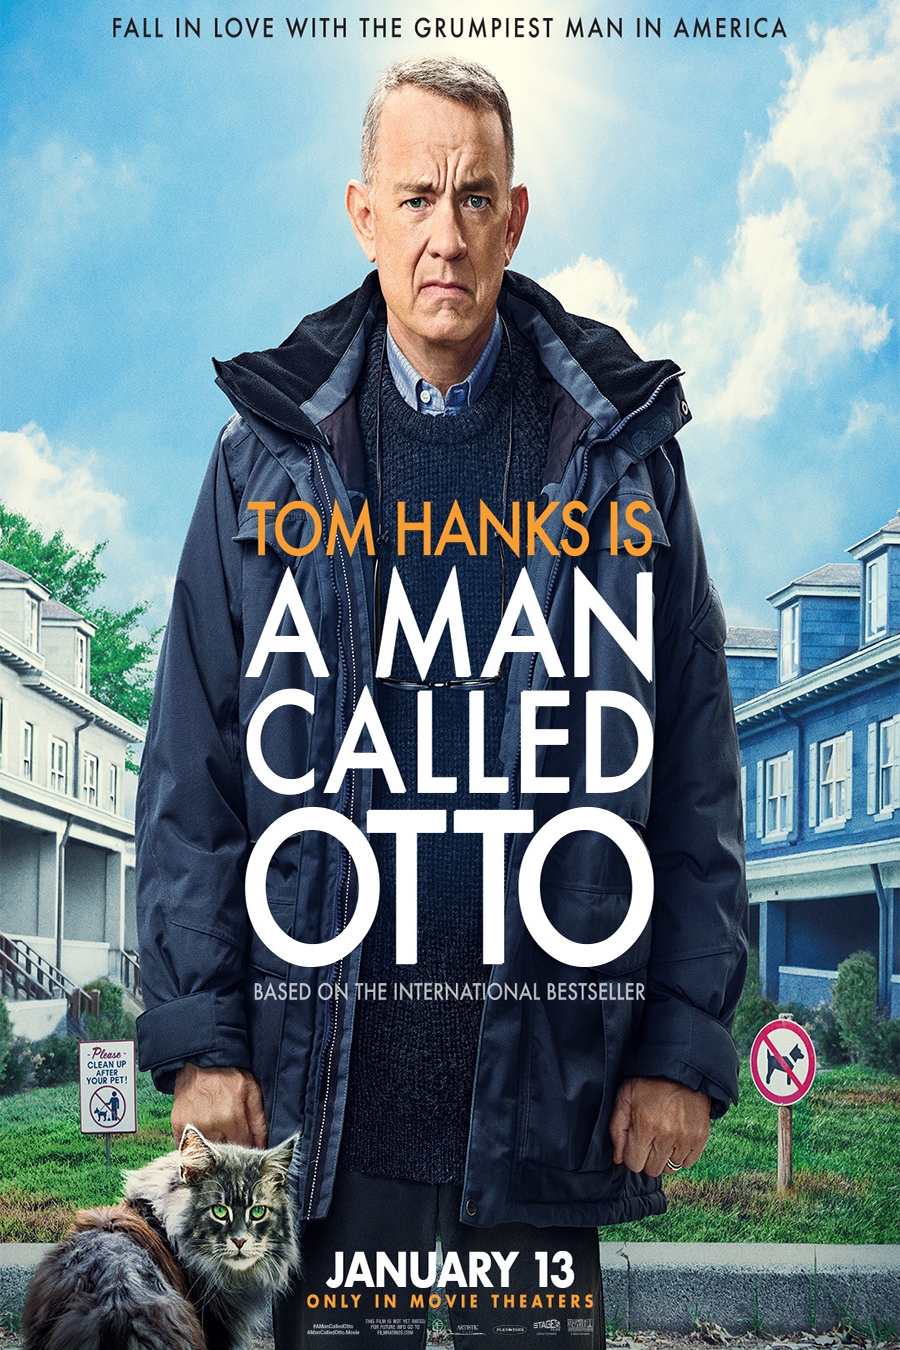 Movie Poster: A Man Called Otto